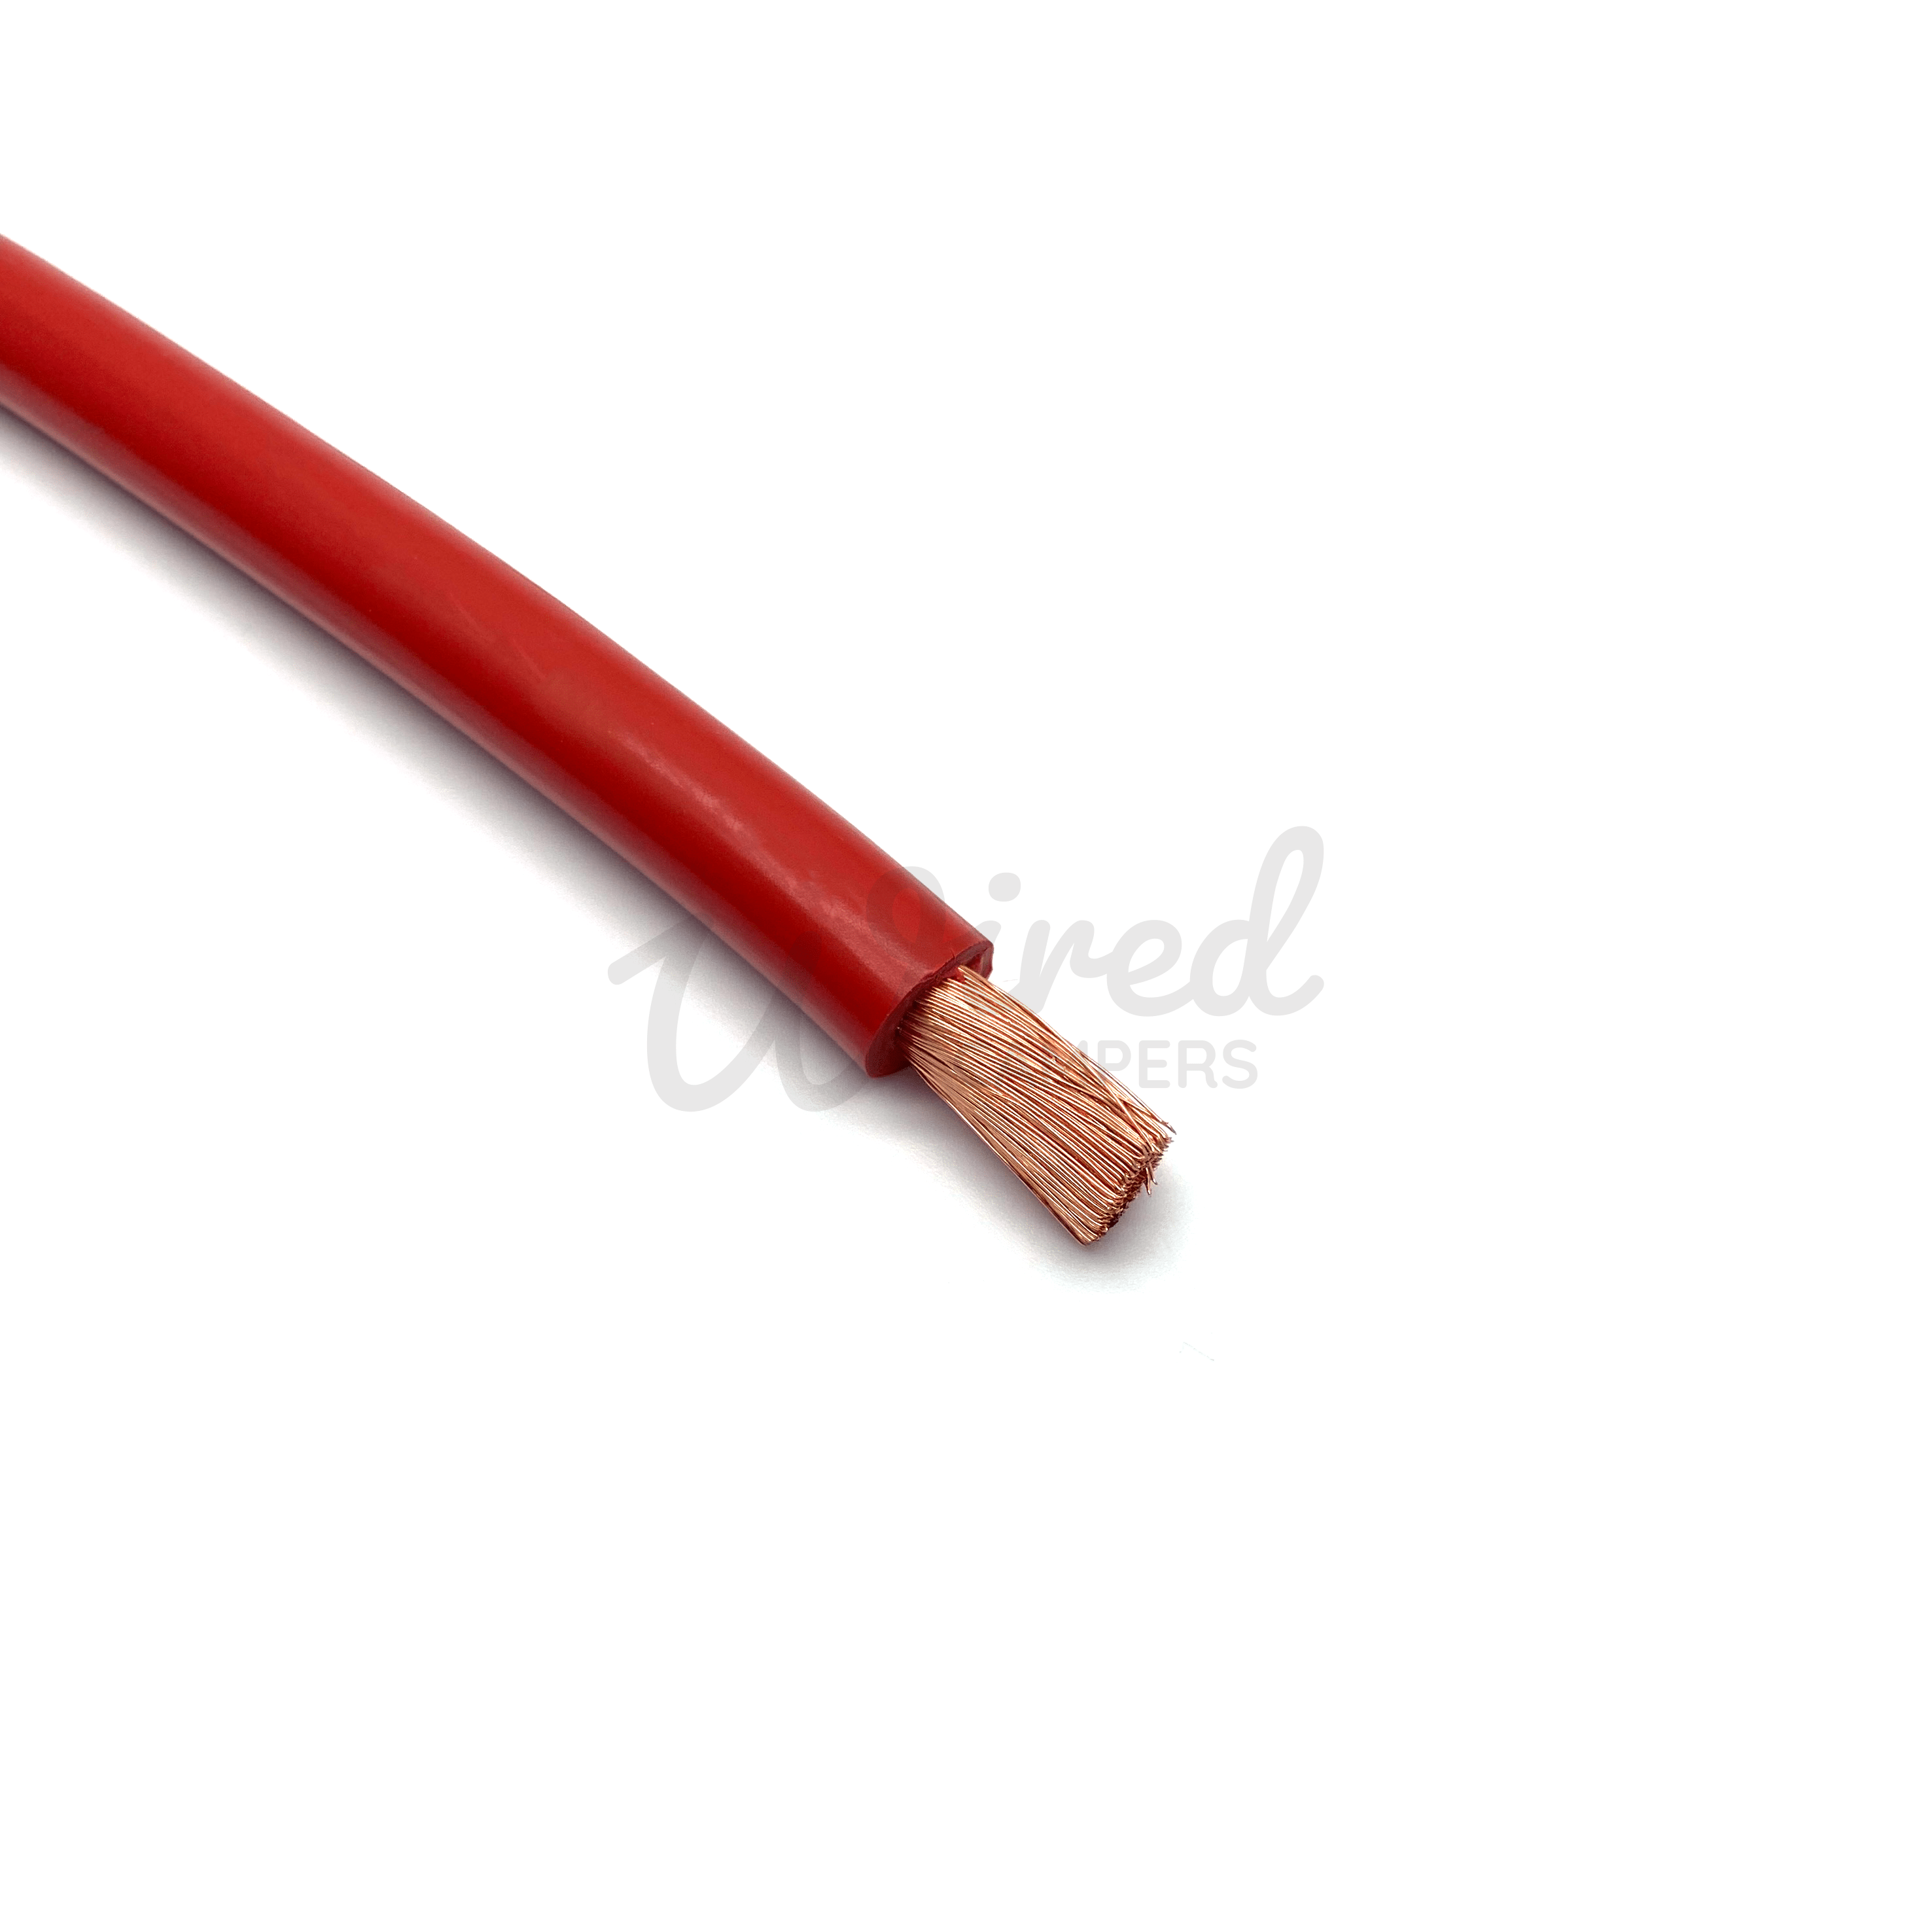 Wired Campers Limited 5M - 25mm² 170A Hi-Flex Battery/Welding/Inverter Flexible Cable - Red Positive